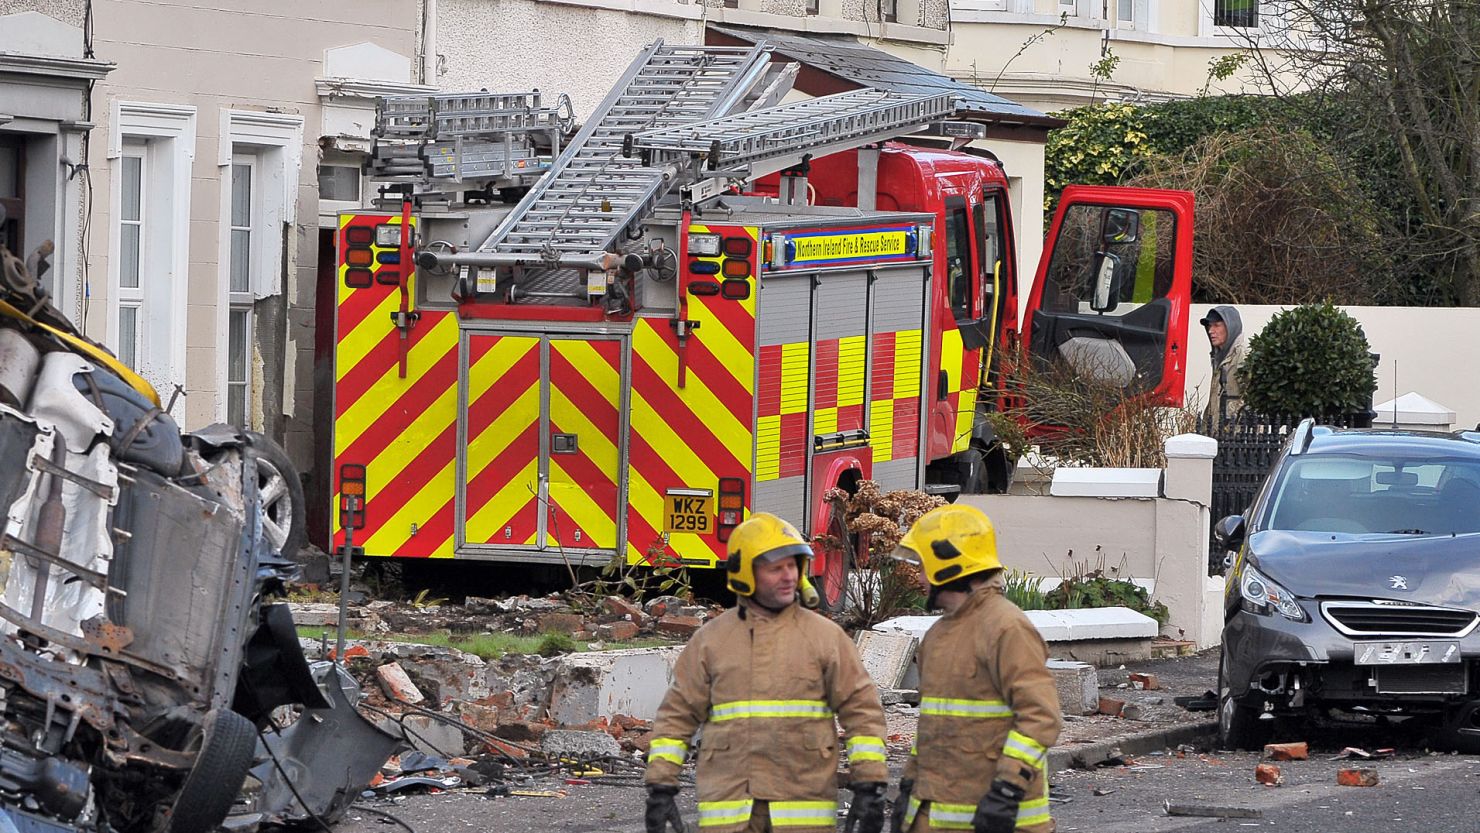 Thieves broke into a Northern Ireland fire station and went on wild joyride in a stolen fire engine, damaging houses and cars.


